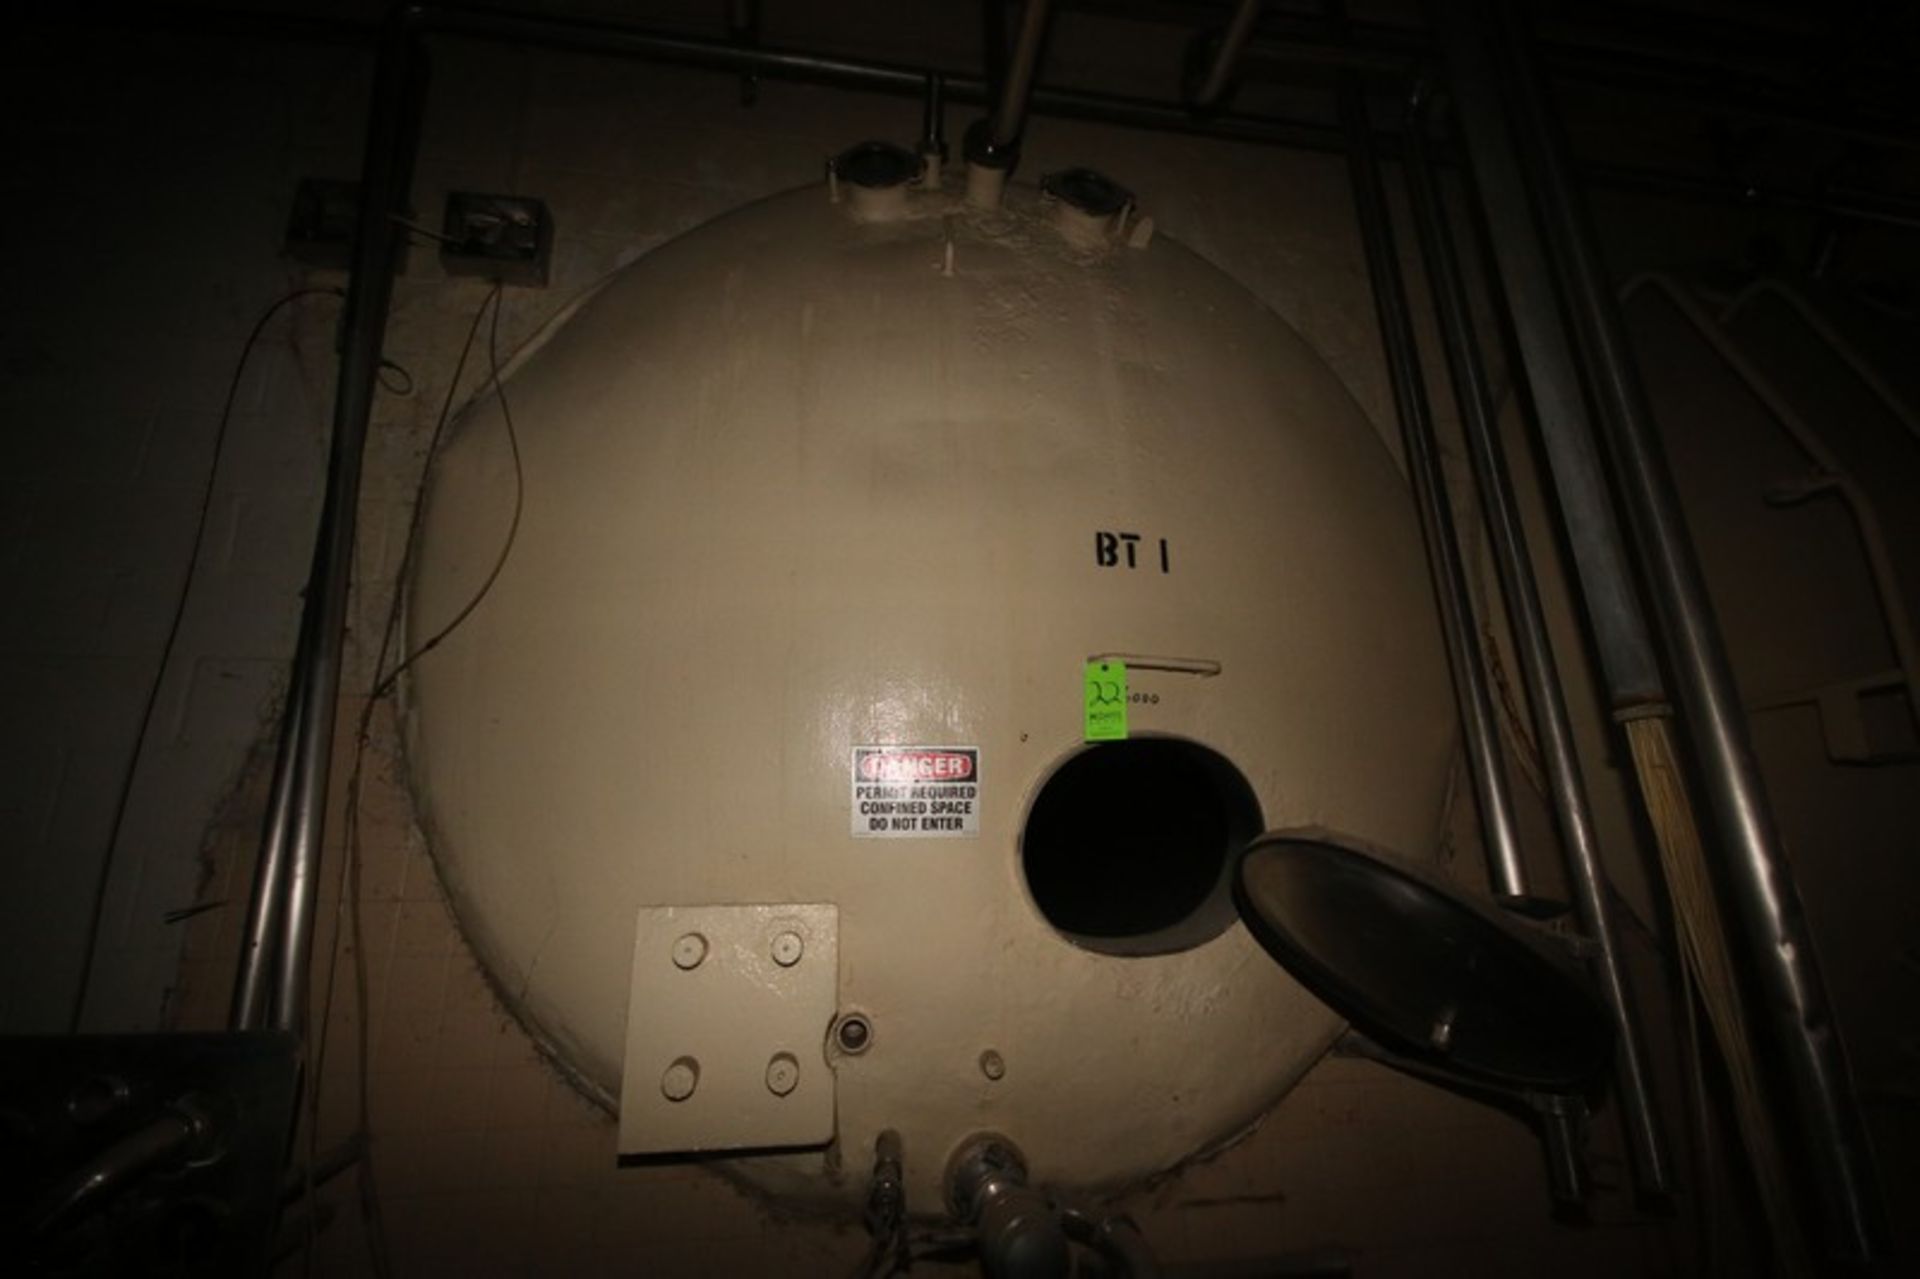 Aprox. 6,000 Gal. S/S Horizontal Tank, with Carbon Steel Sheathing, Dish Heads, Tank Dims.: Aprox. - Image 2 of 4